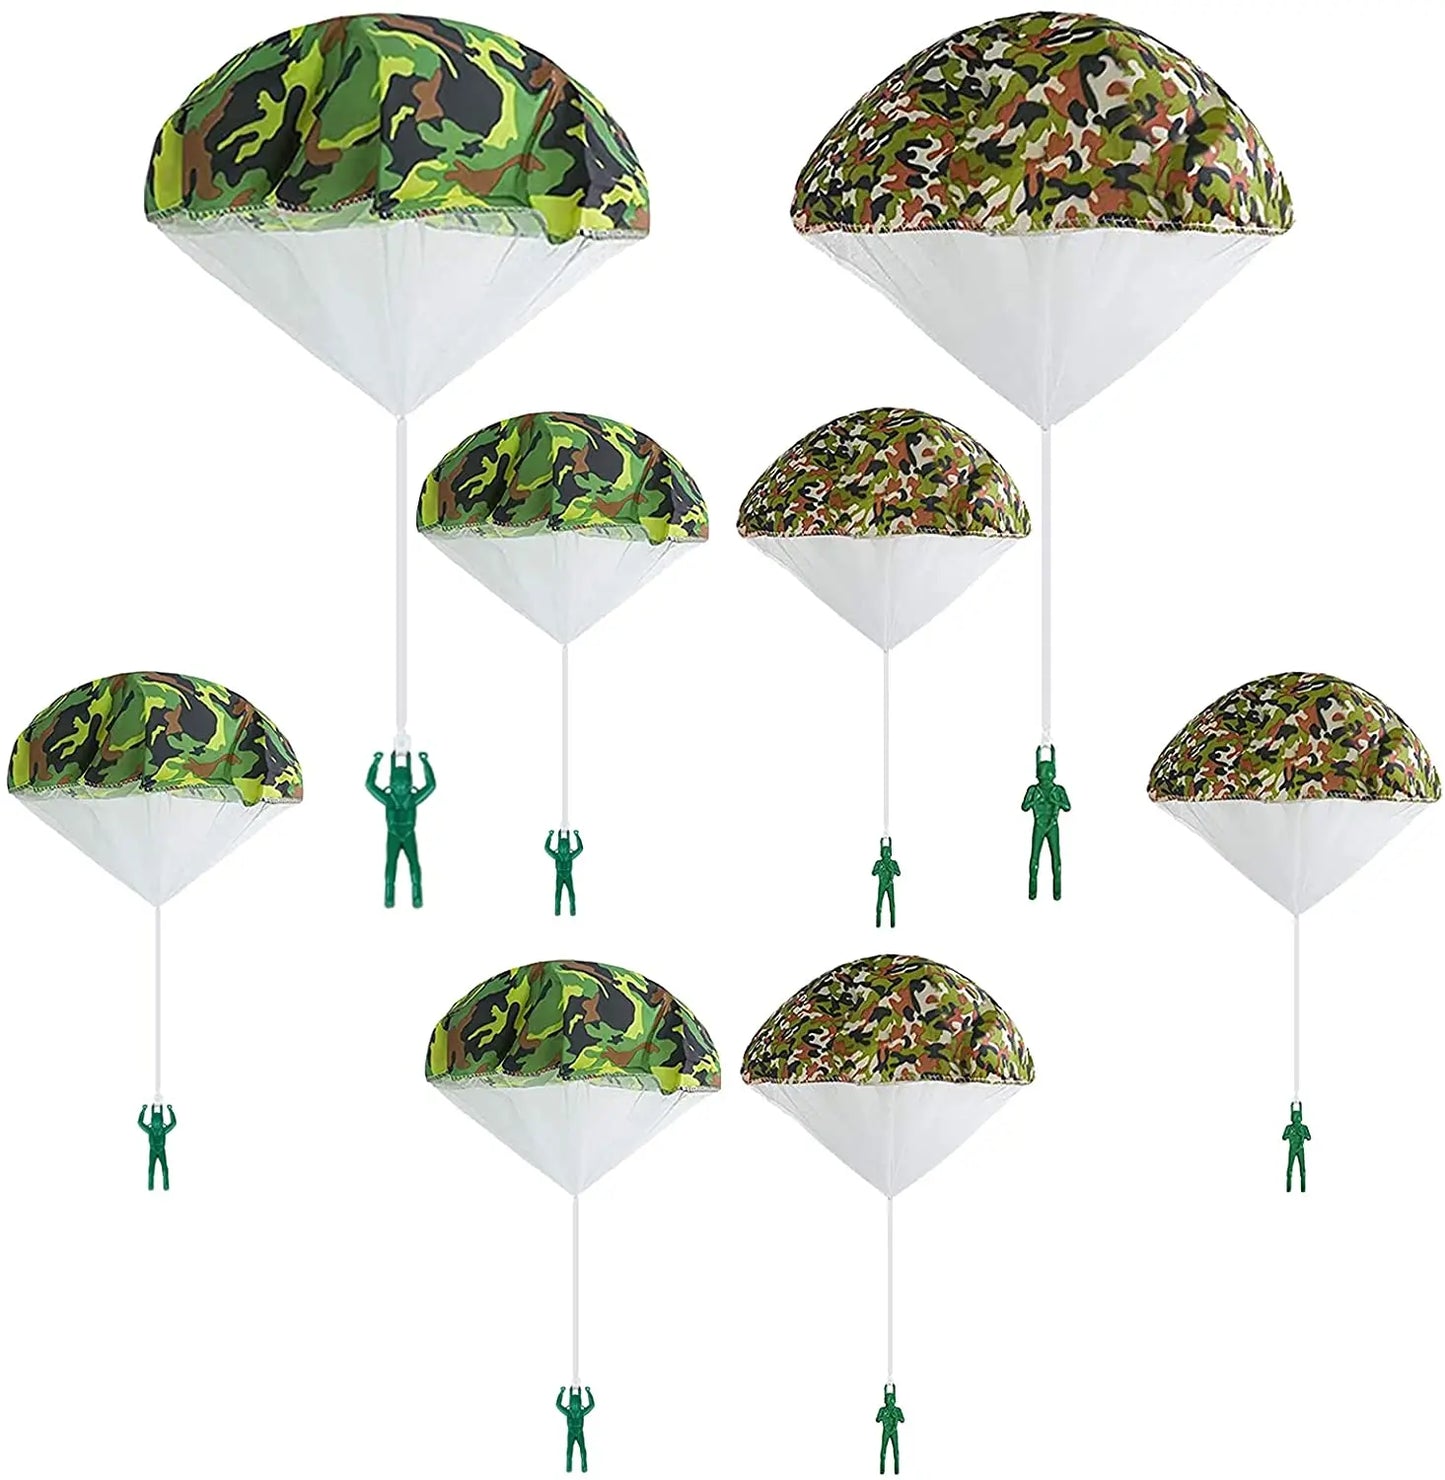 Hand Throwing Mini Soldier Camouflag Parachute for Kids Outdoor Toys Game Educational Flying Sport for Children